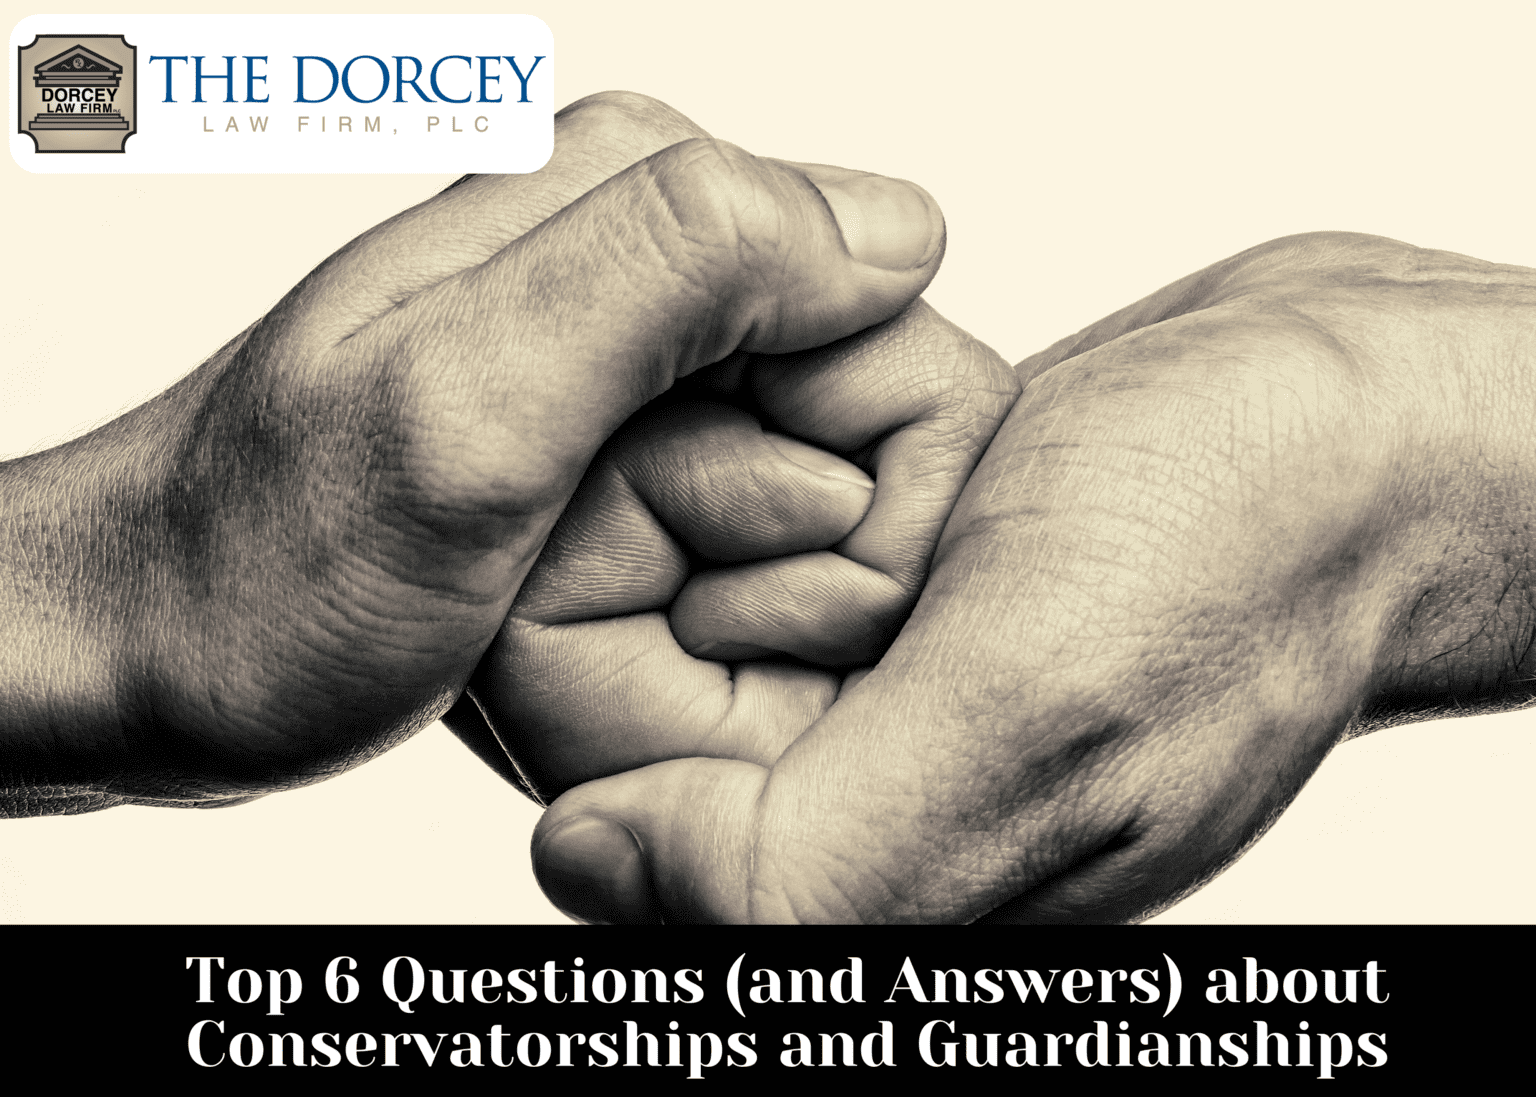 Top 6 Questions (And Answers) About Conservatorships and Guardianships